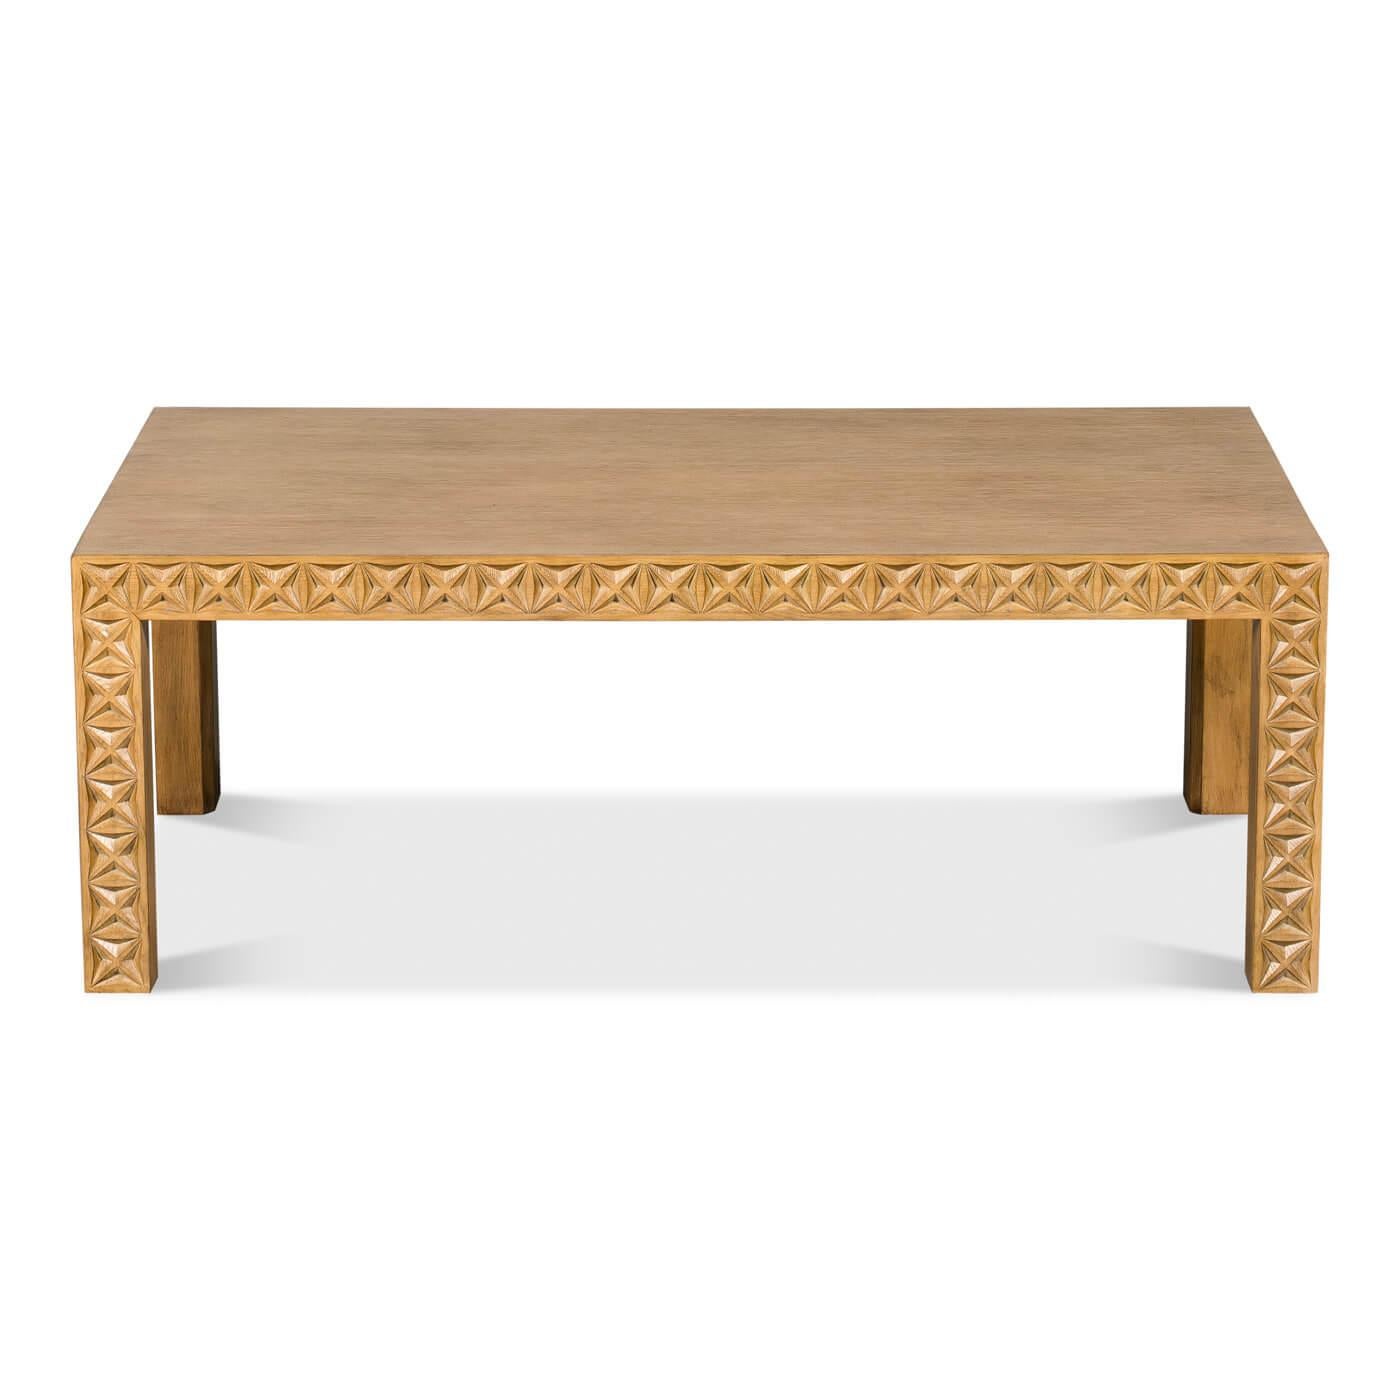 A southwestern-style carved leg coffee table crafted in oak. The rails and legs feature a chip-carved geometric design.

A beautiful piece that highlights a hand-carved design that can be admired from all angles. 

Dimensions: 47